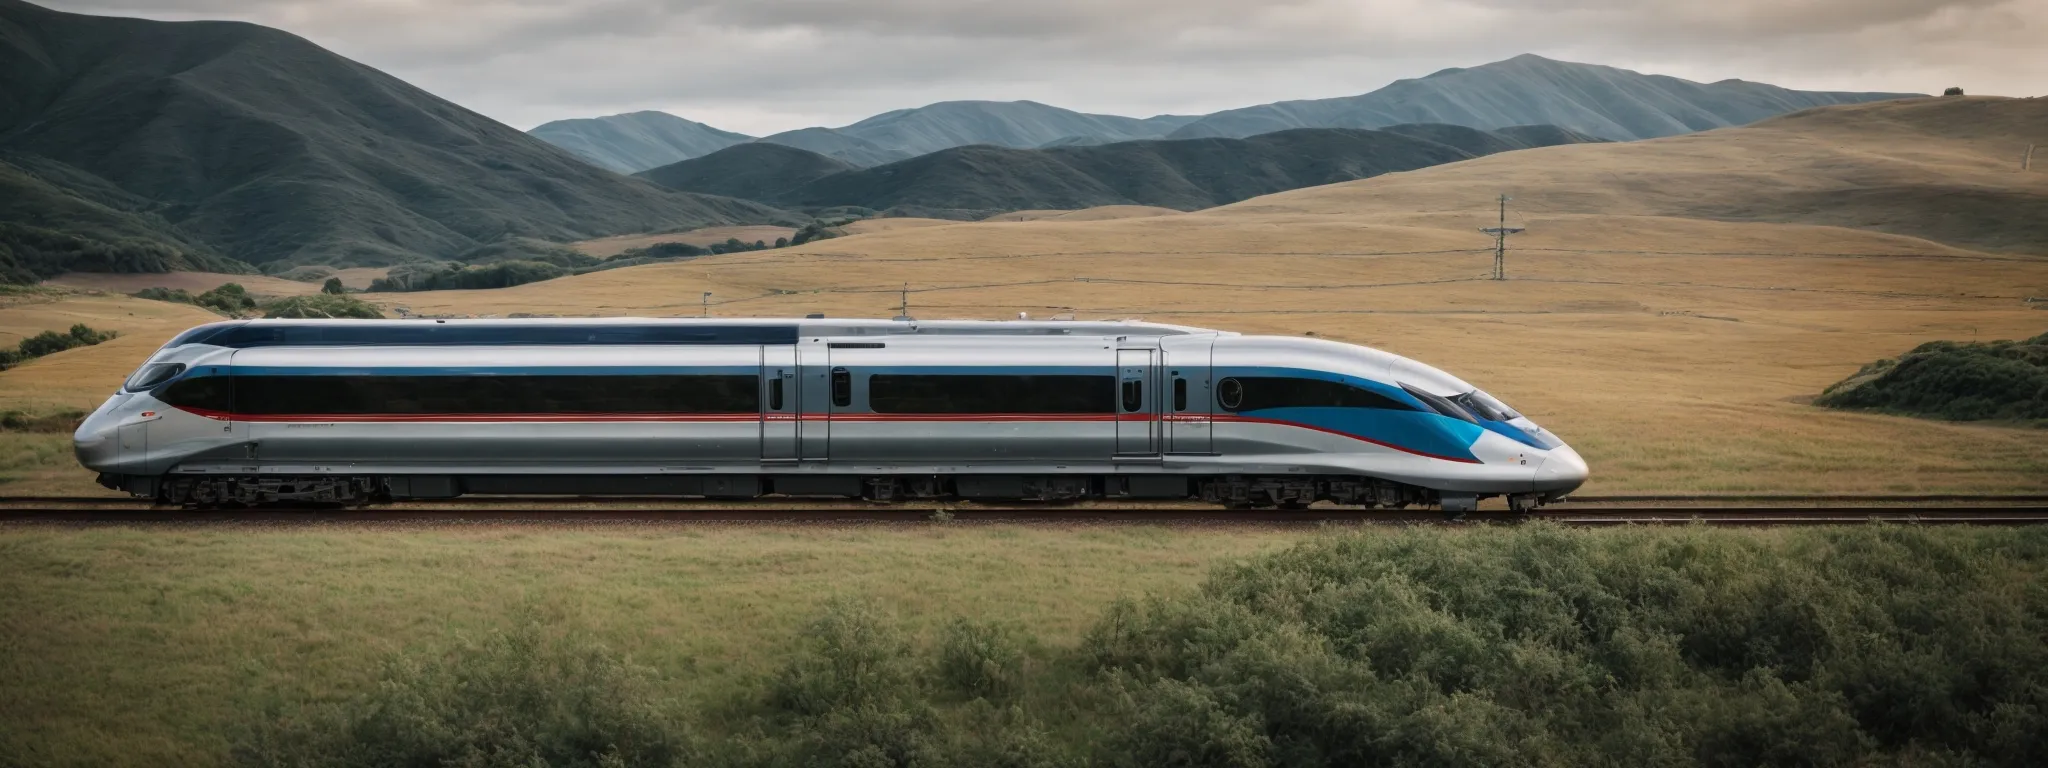 a streamlined bullet train slicing through the landscape, emblematic of speed and efficiency.